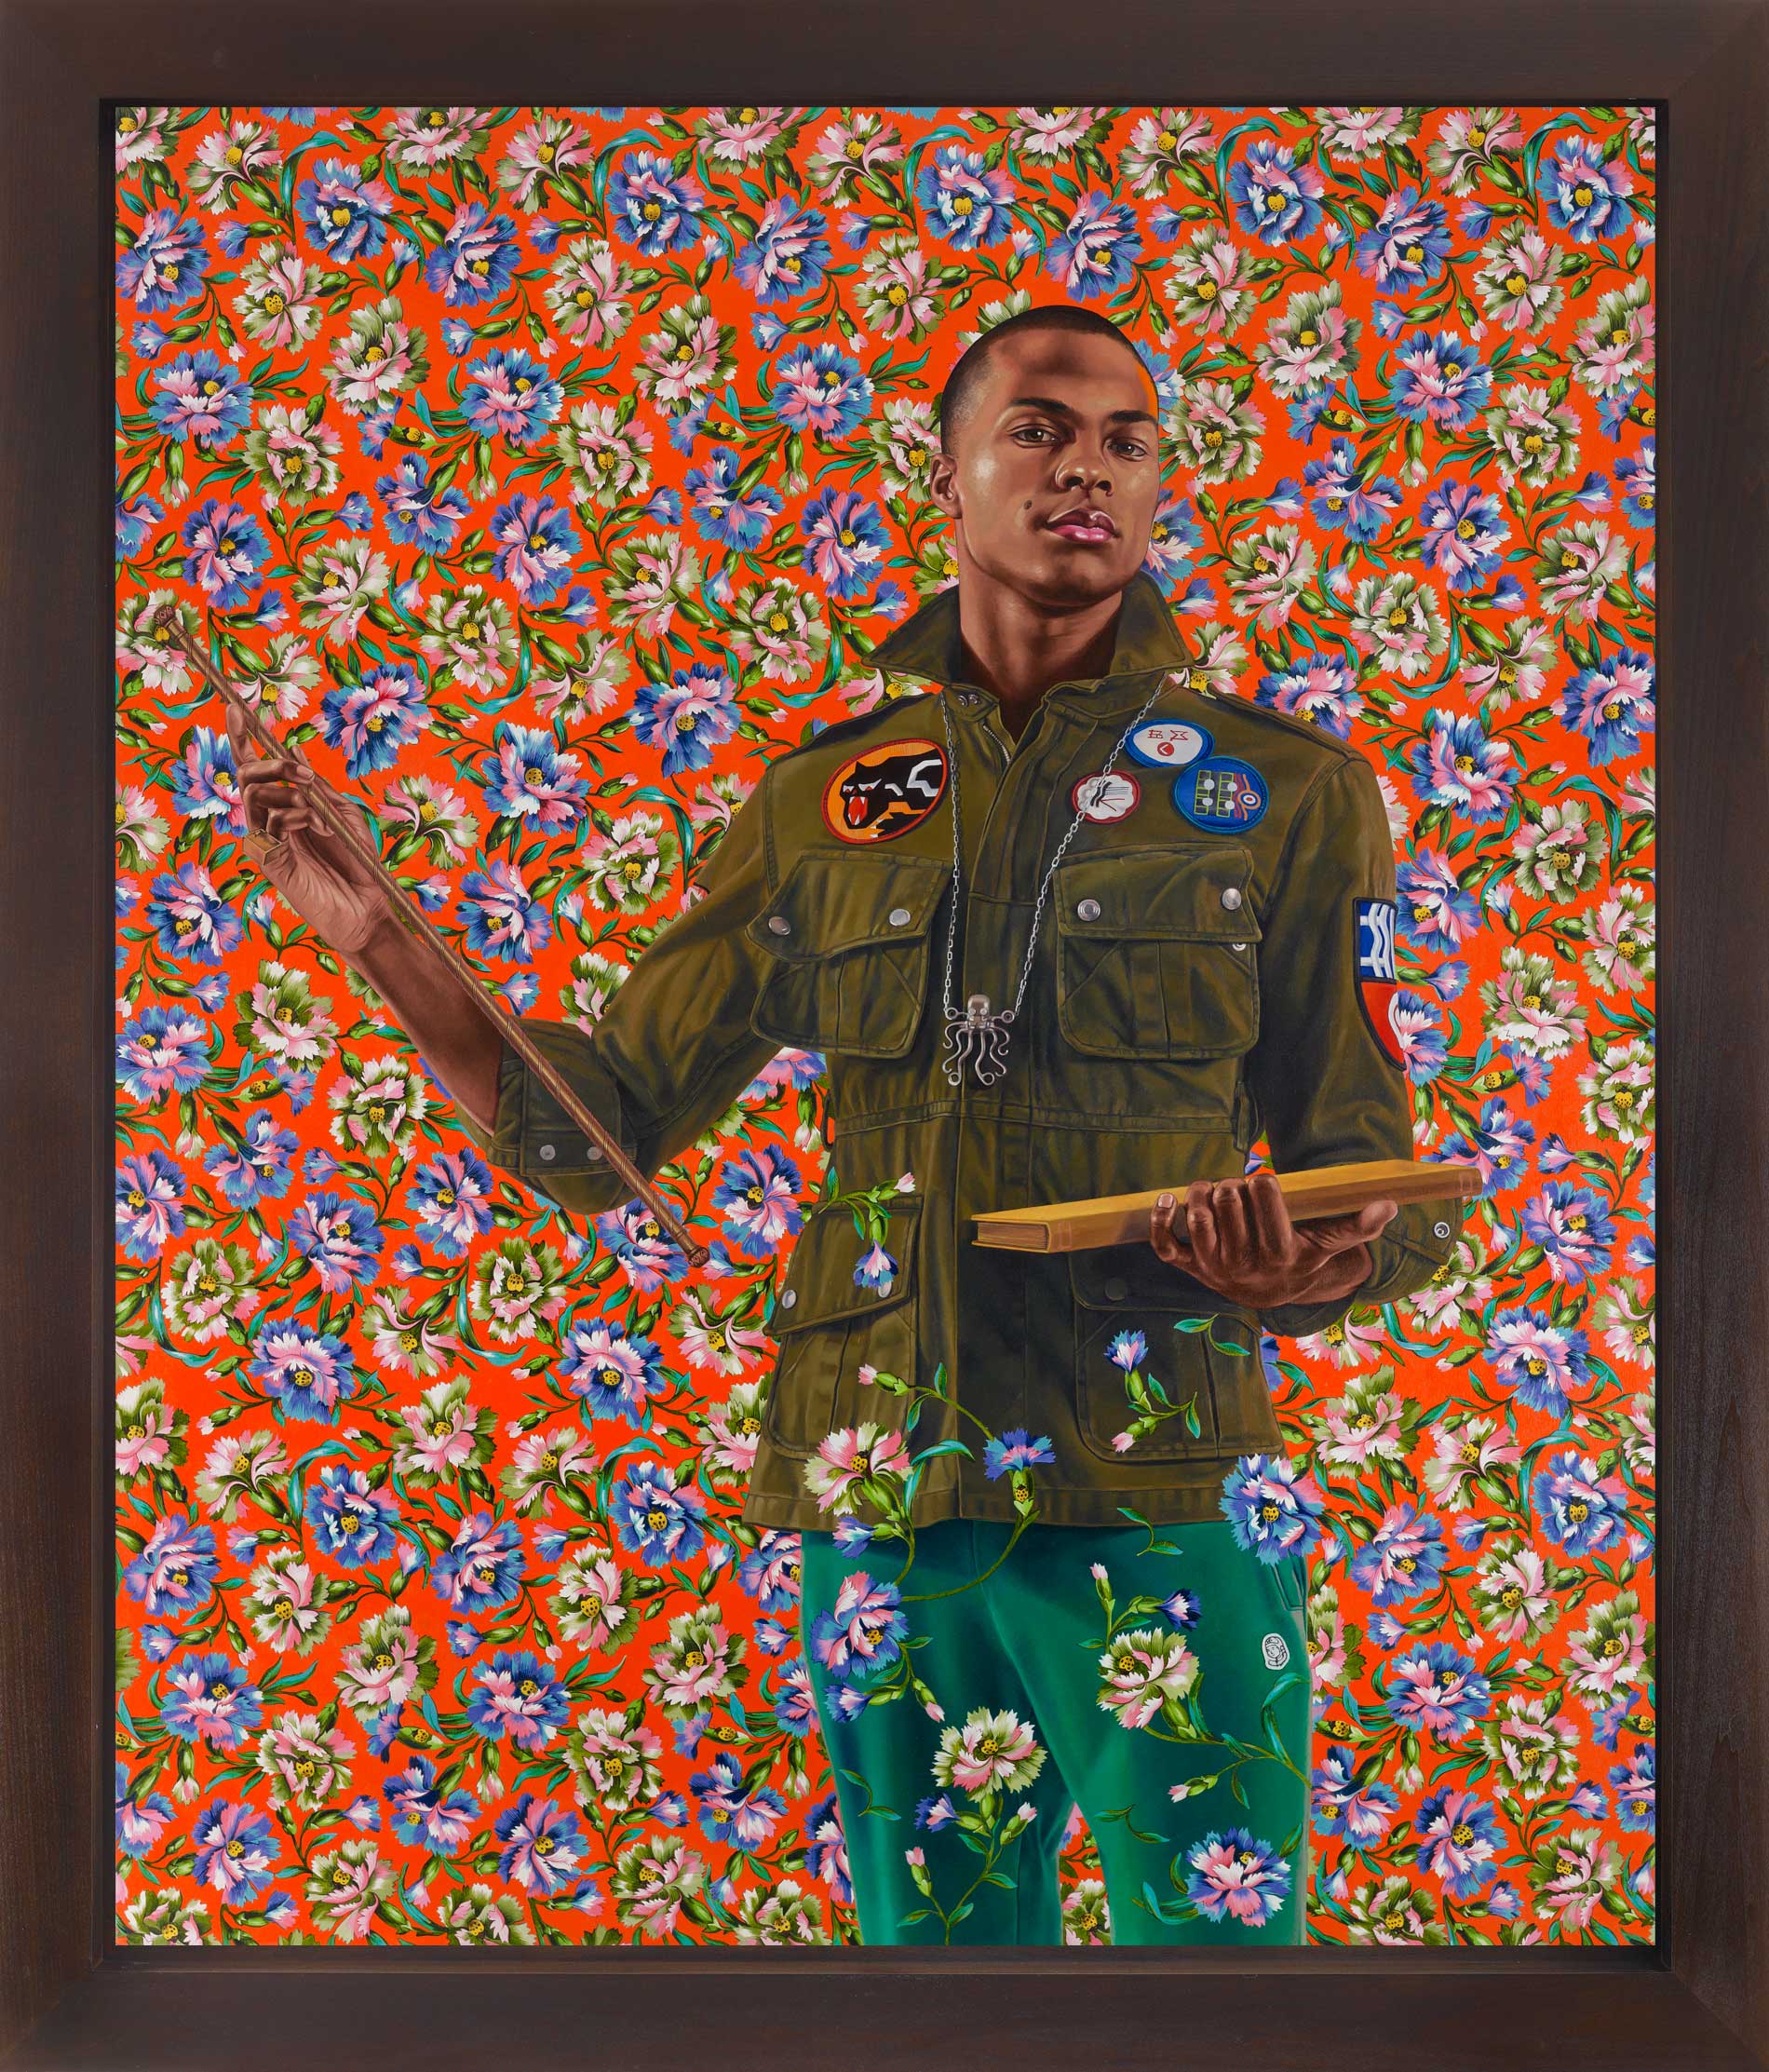 Kehinde Wiley | A New Republic, Brooklyn Museum, New York City, USA,  February 20- May 24, 2015 | Anthony of Padua, 2013 Oil on Canvas. | 9